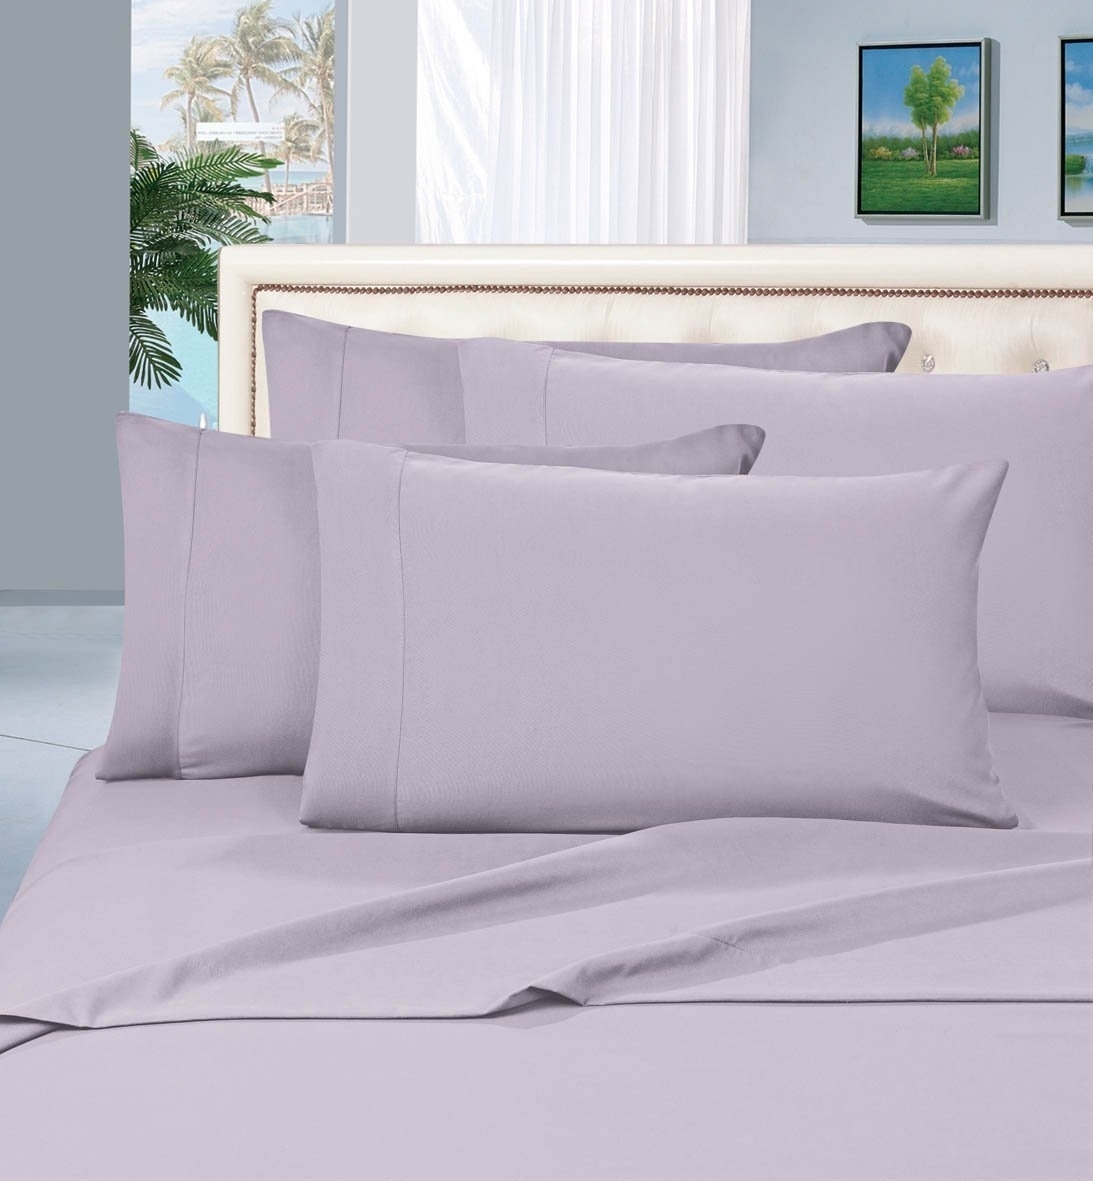 Elegant Comfort 1500 Series Wrinkle Resistant Egyptian Quality Hypoallergenic Ultra Soft Luxury 4-piece Sheet Set, California King, Lilac